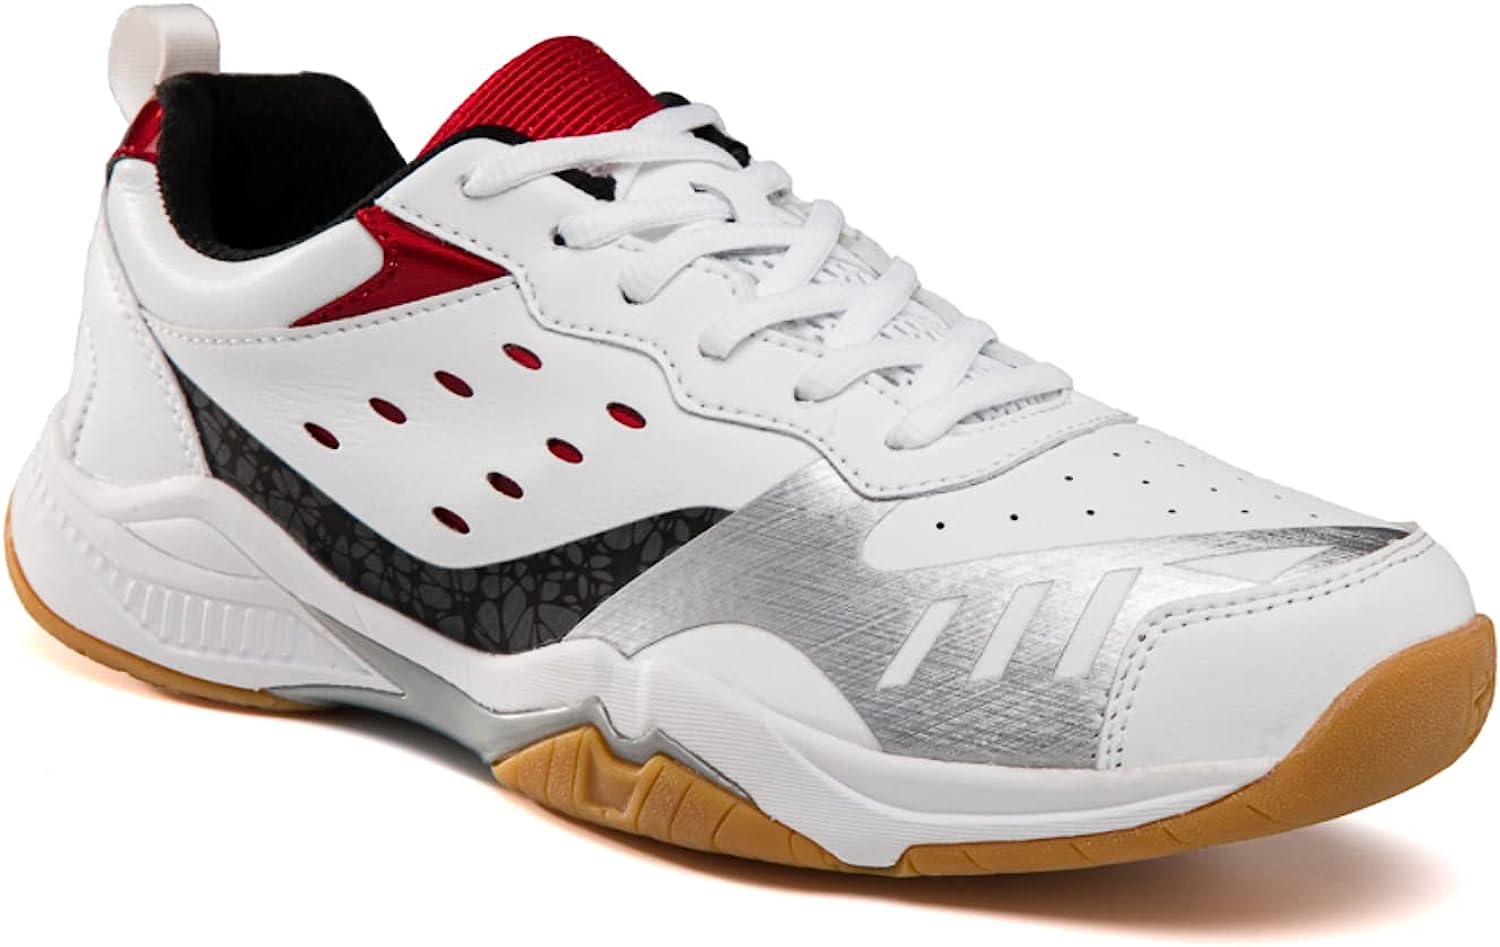 LUPWEE Pickleball Shoes for Men Women All Court Tennis [...]